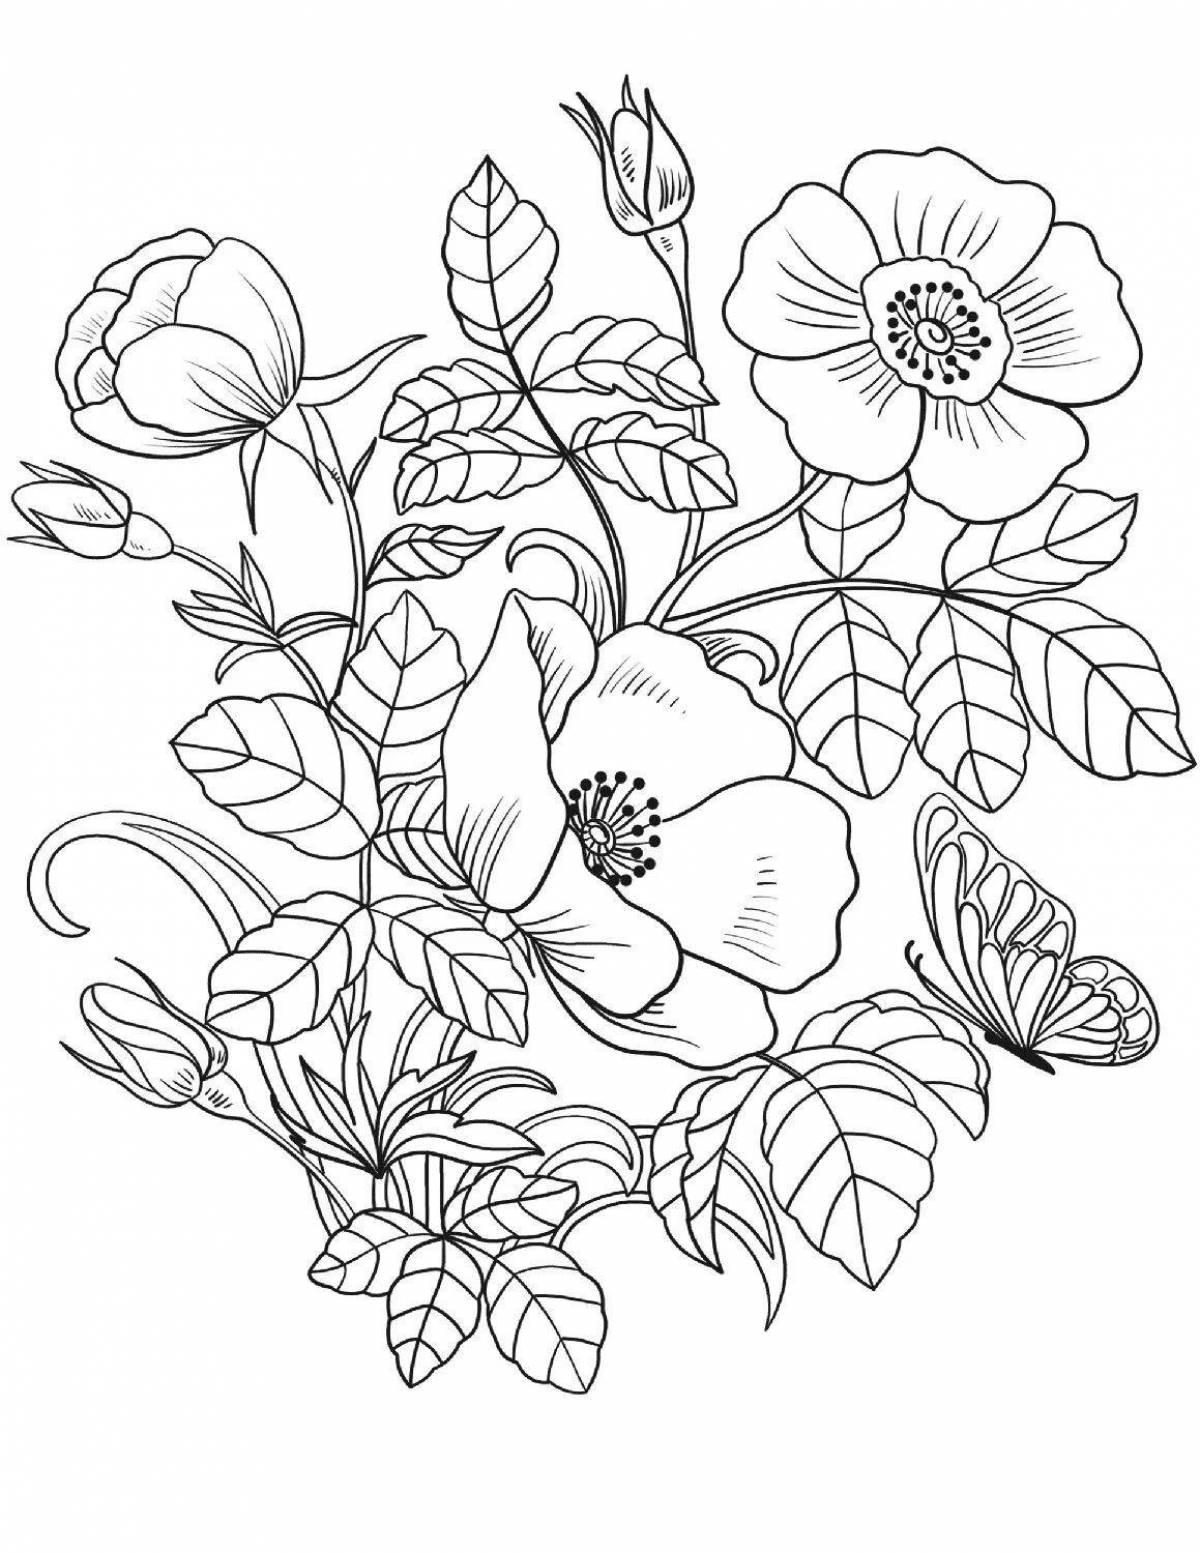 Great coloring picture of flowers